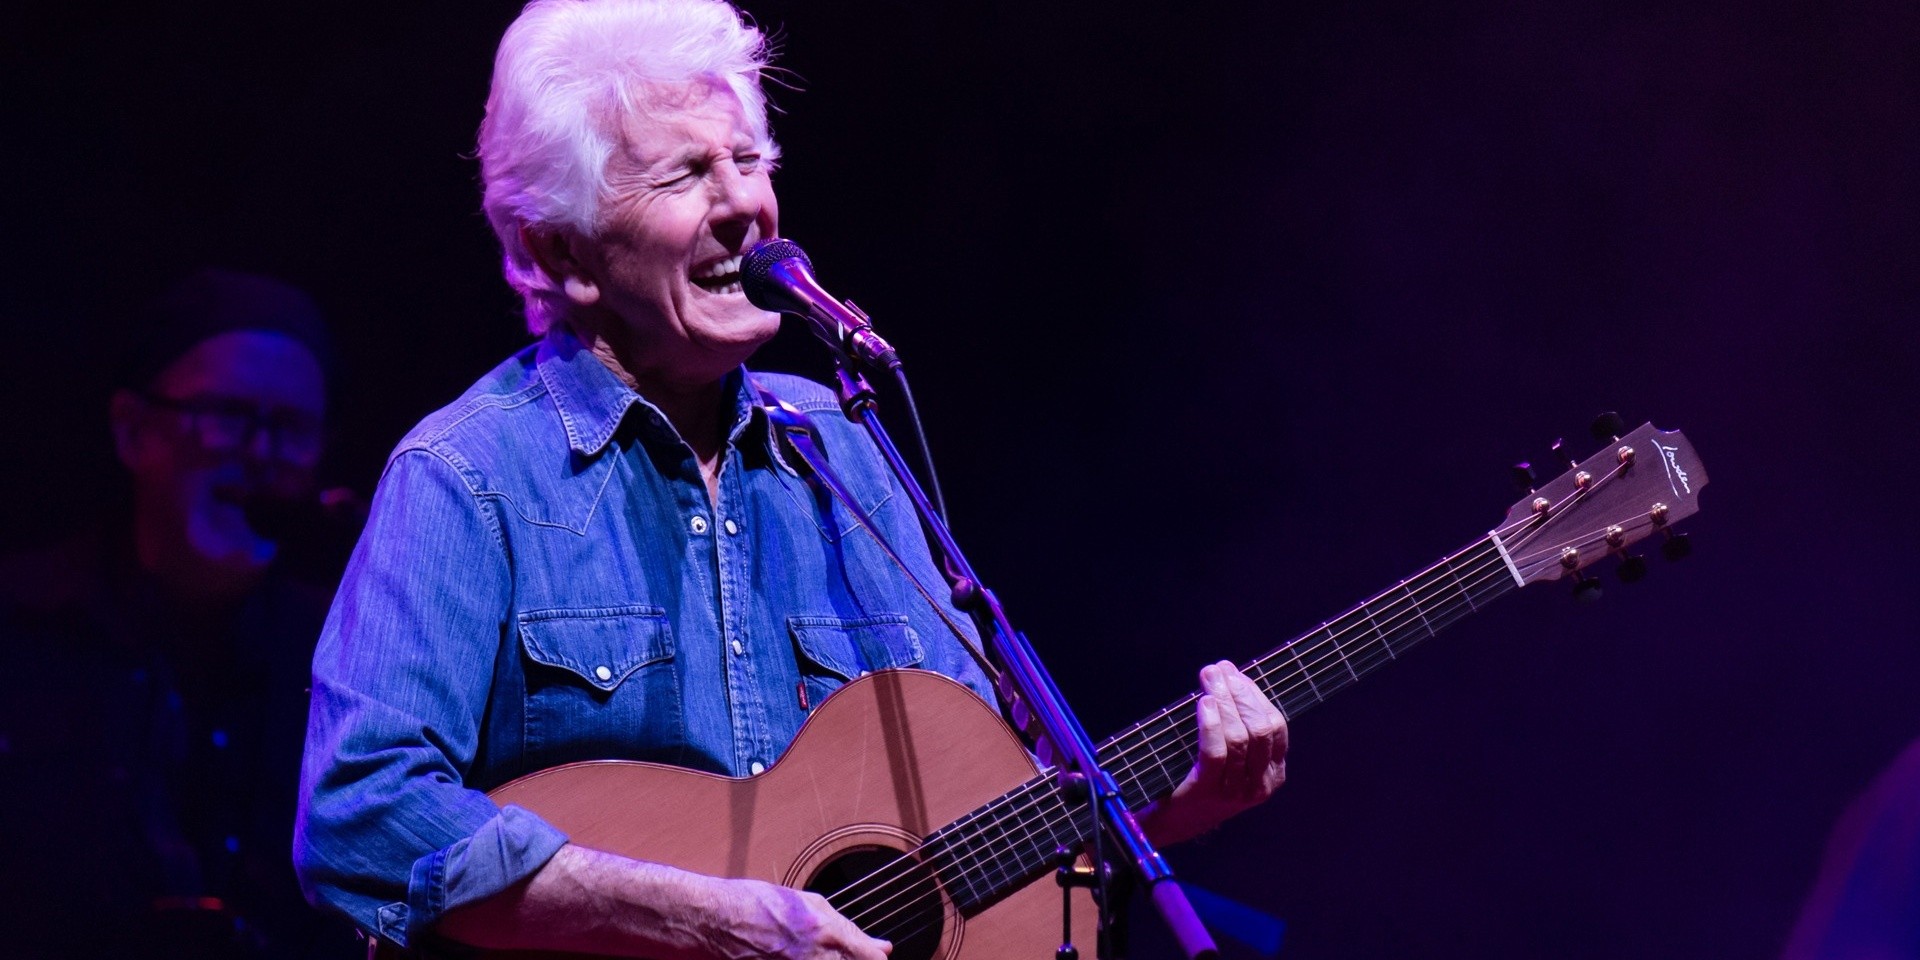 WATCH: Graham Nash brands possible Trump presidency as "terrifying", performs 'This Path Tonight'